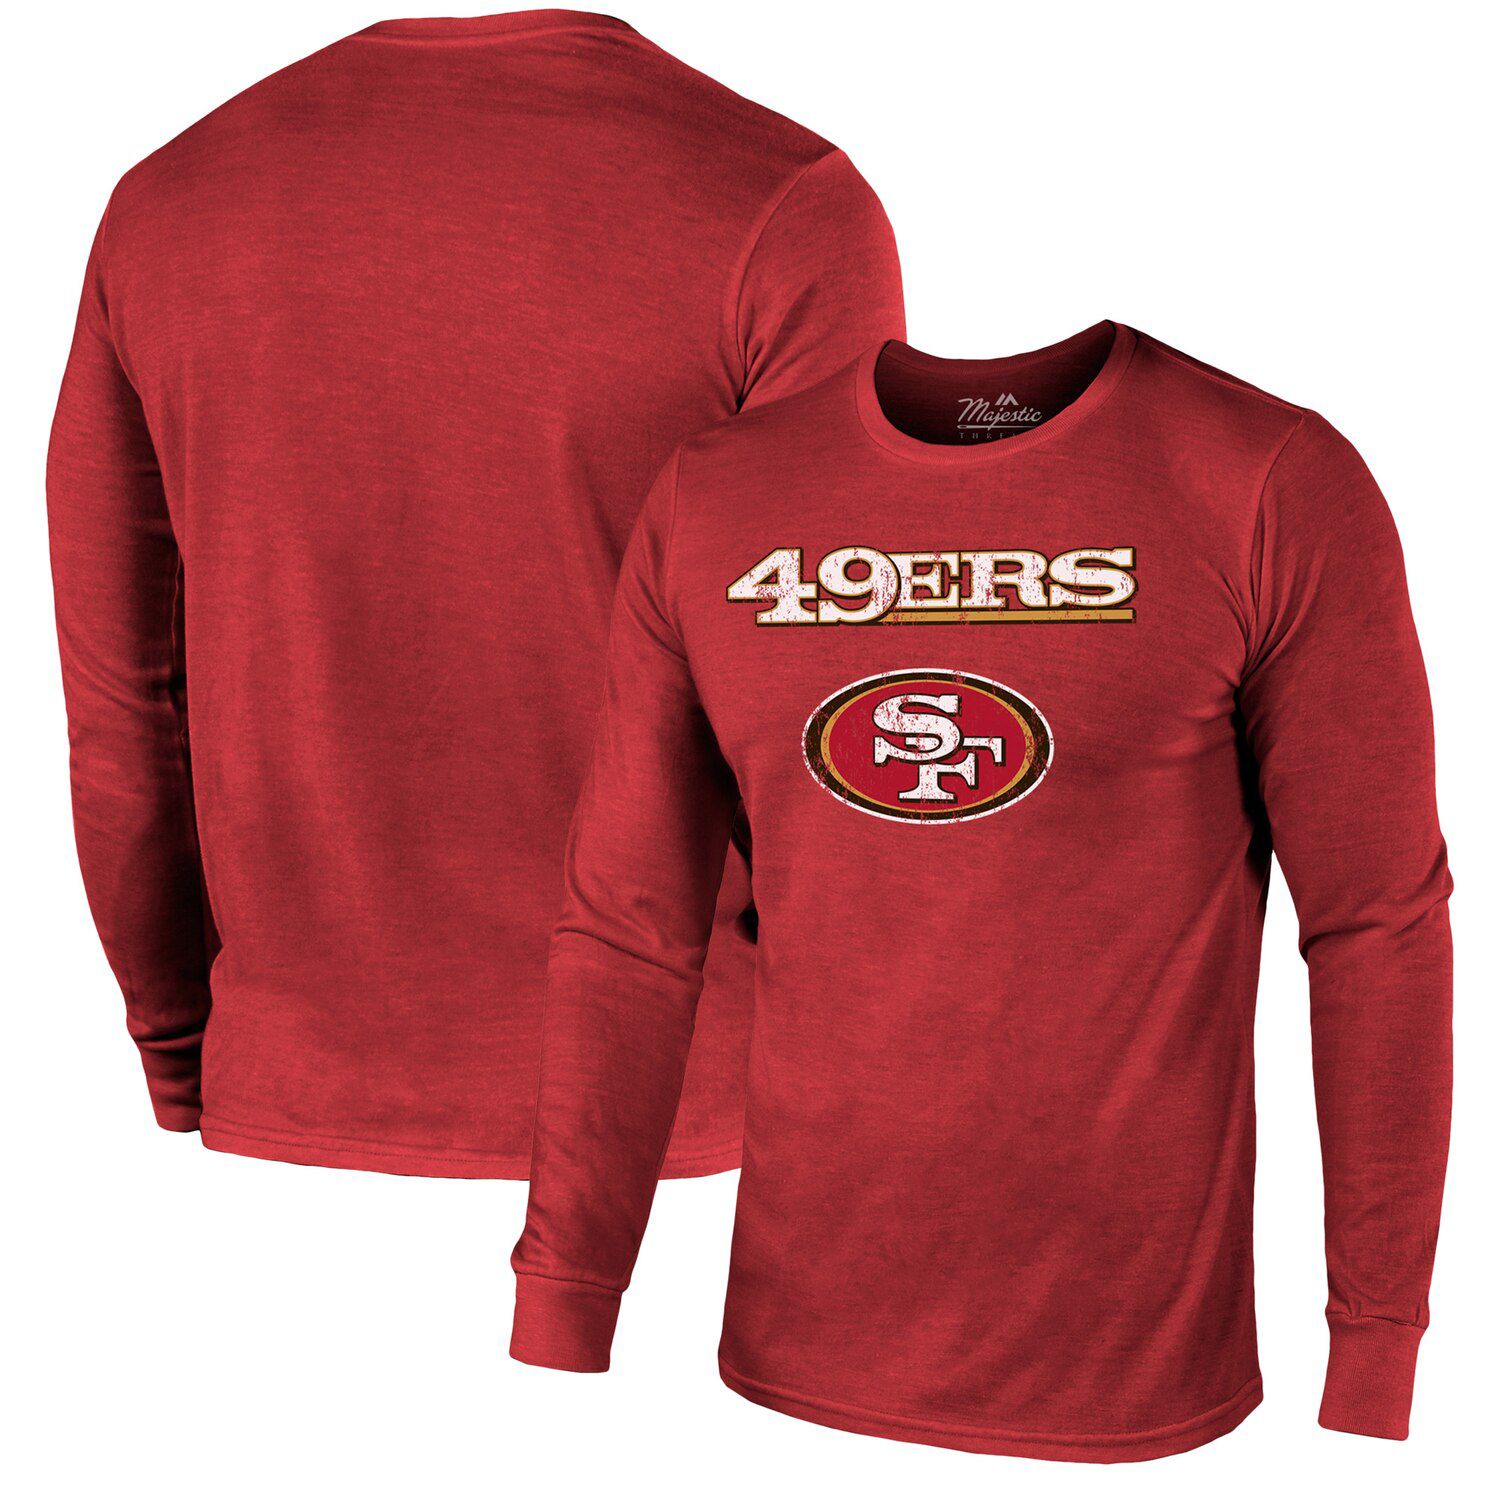 49ers long sleeve throwback jersey